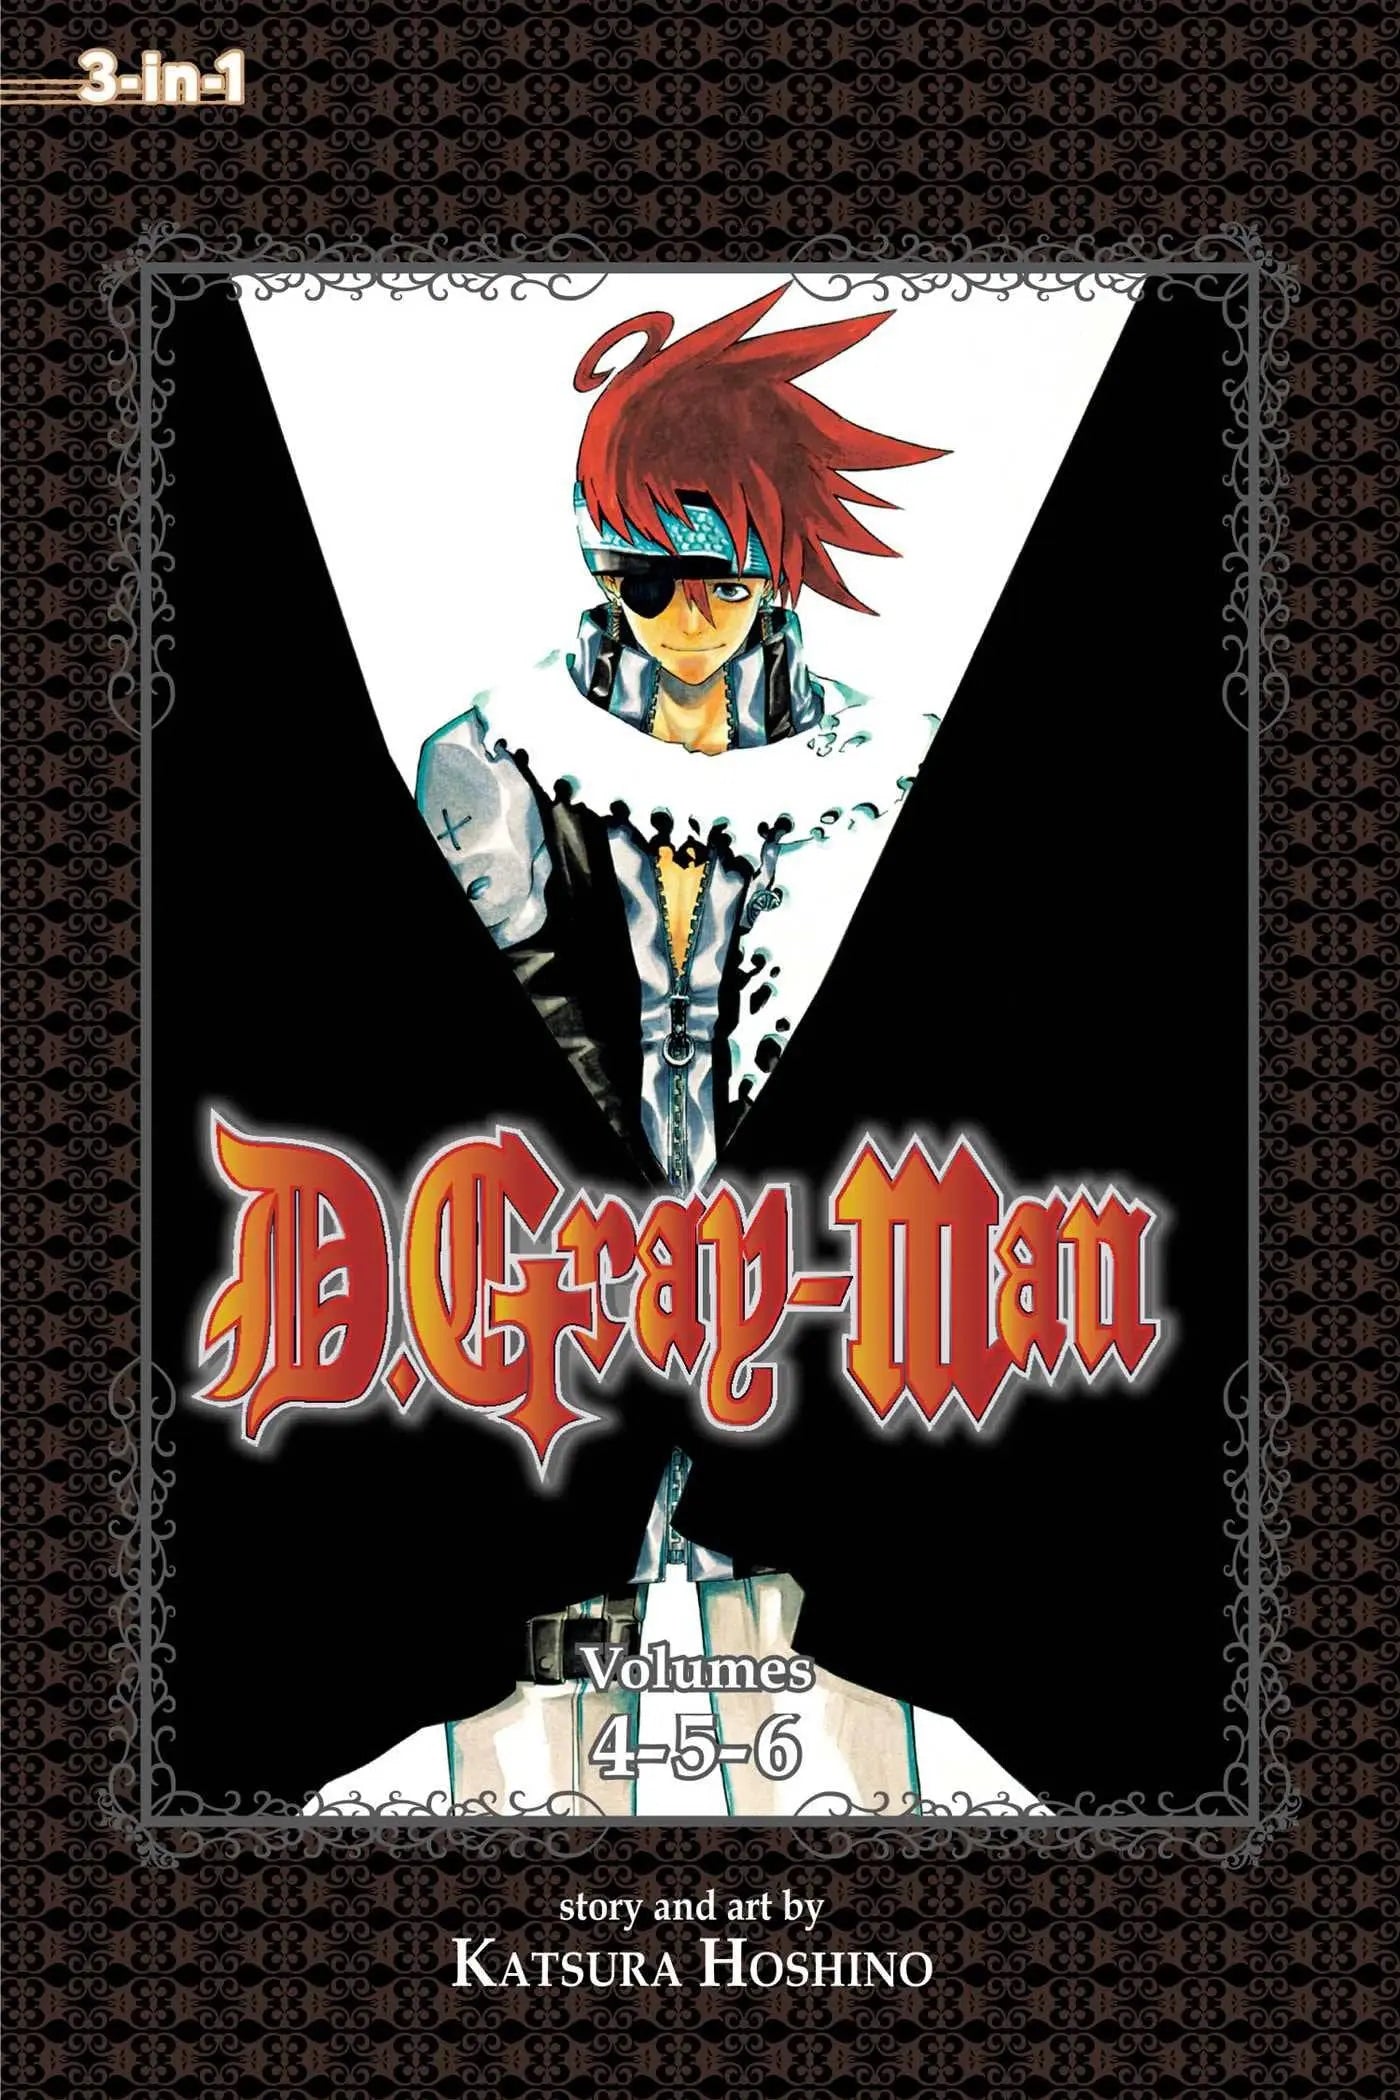 D.Gray-man (3-in-1 Edition), Vol. 2: Includes vols. 4, 5 & 6 King Gaming